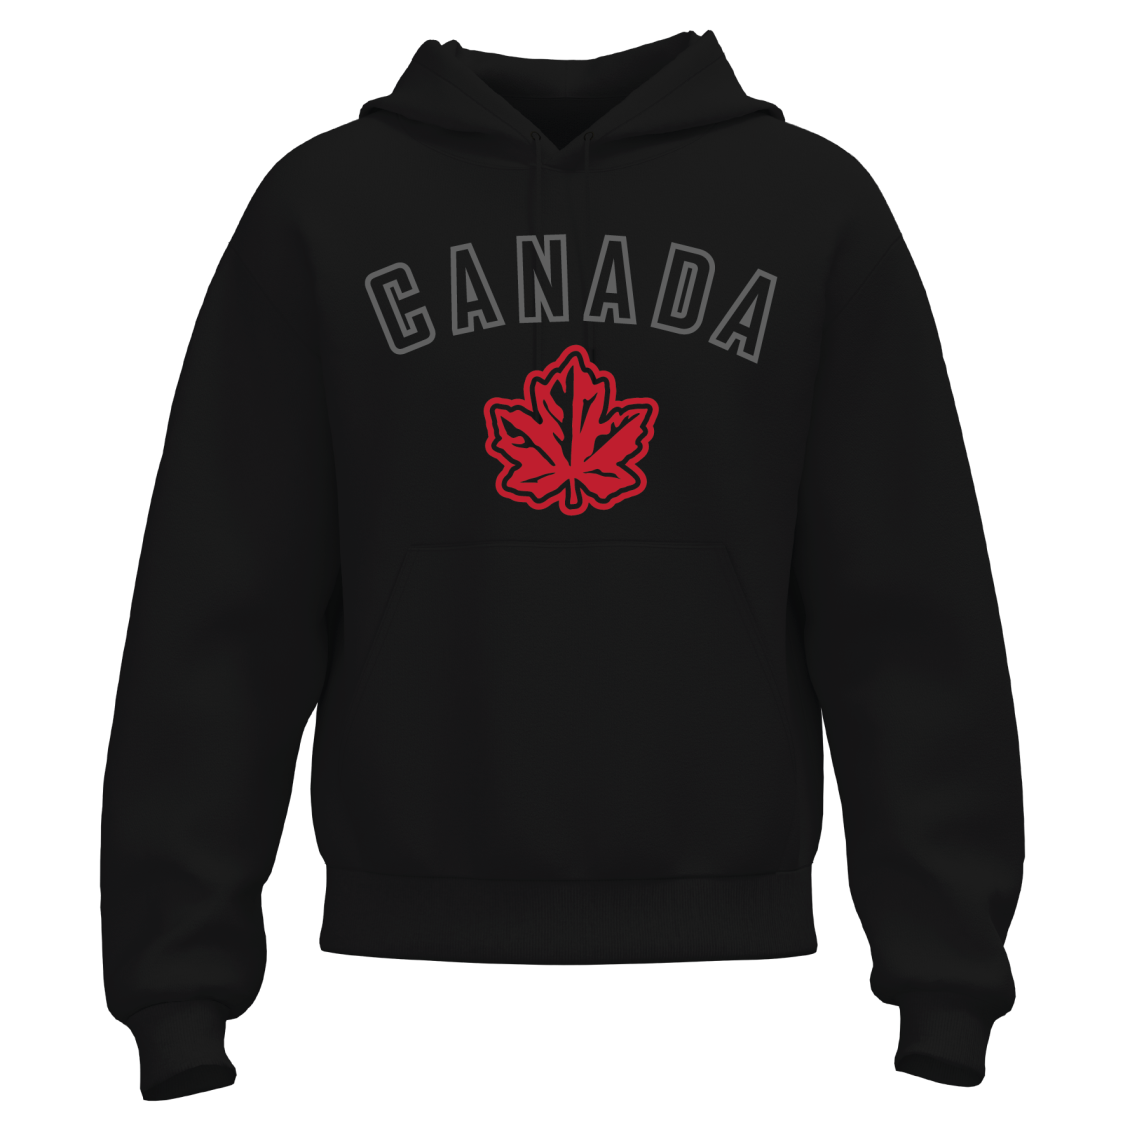 OCG Hoodie with Canada Maple Leaf Emblem embroidered Full Front on Black